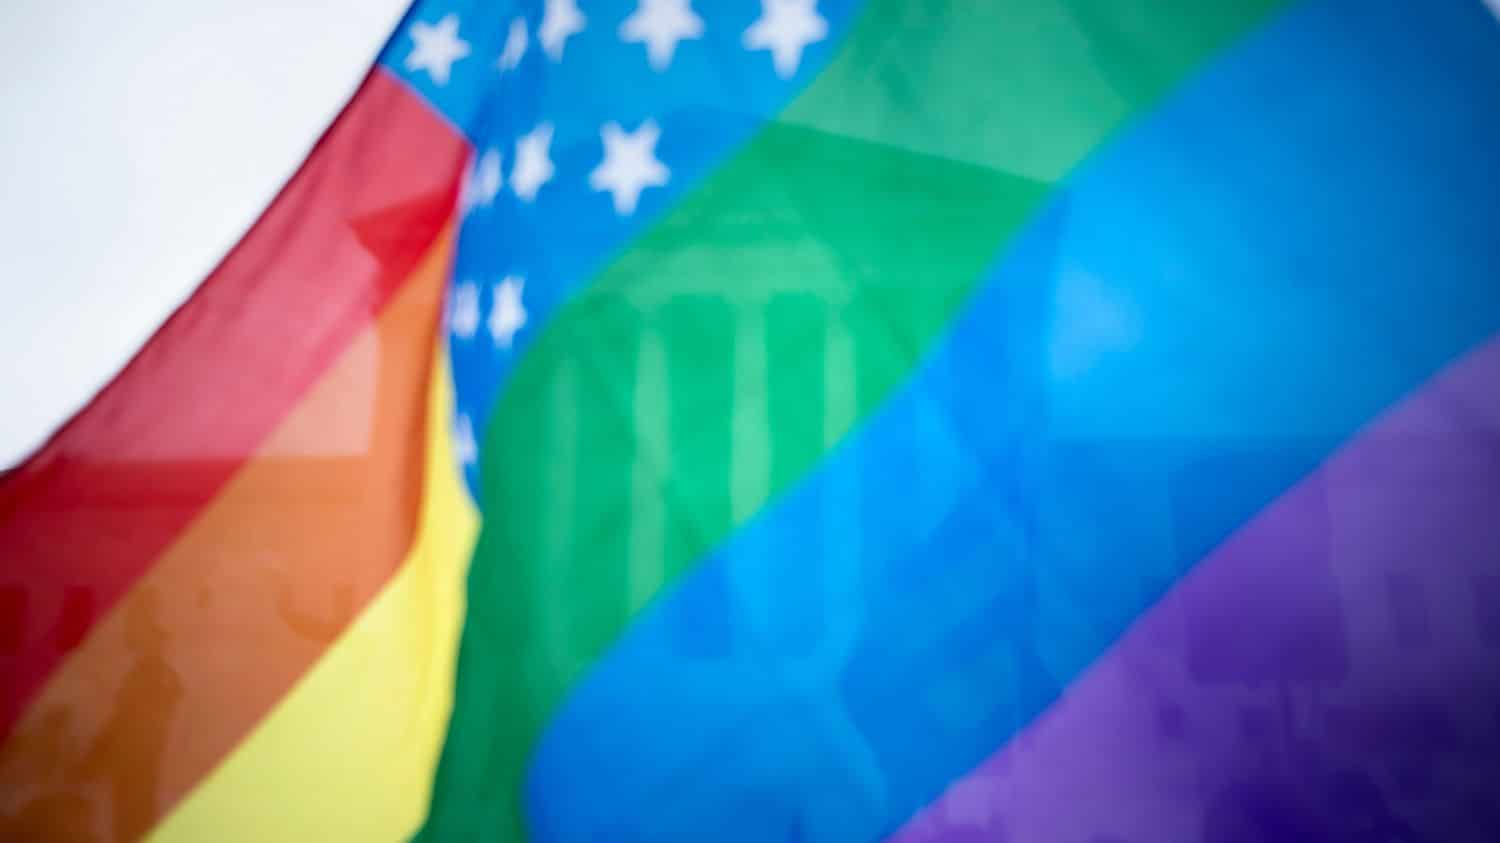 Judge Dismisses Homophobe S Lawsuit Claiming Rainbow Flags Are Religious Symbols Meaws Gay